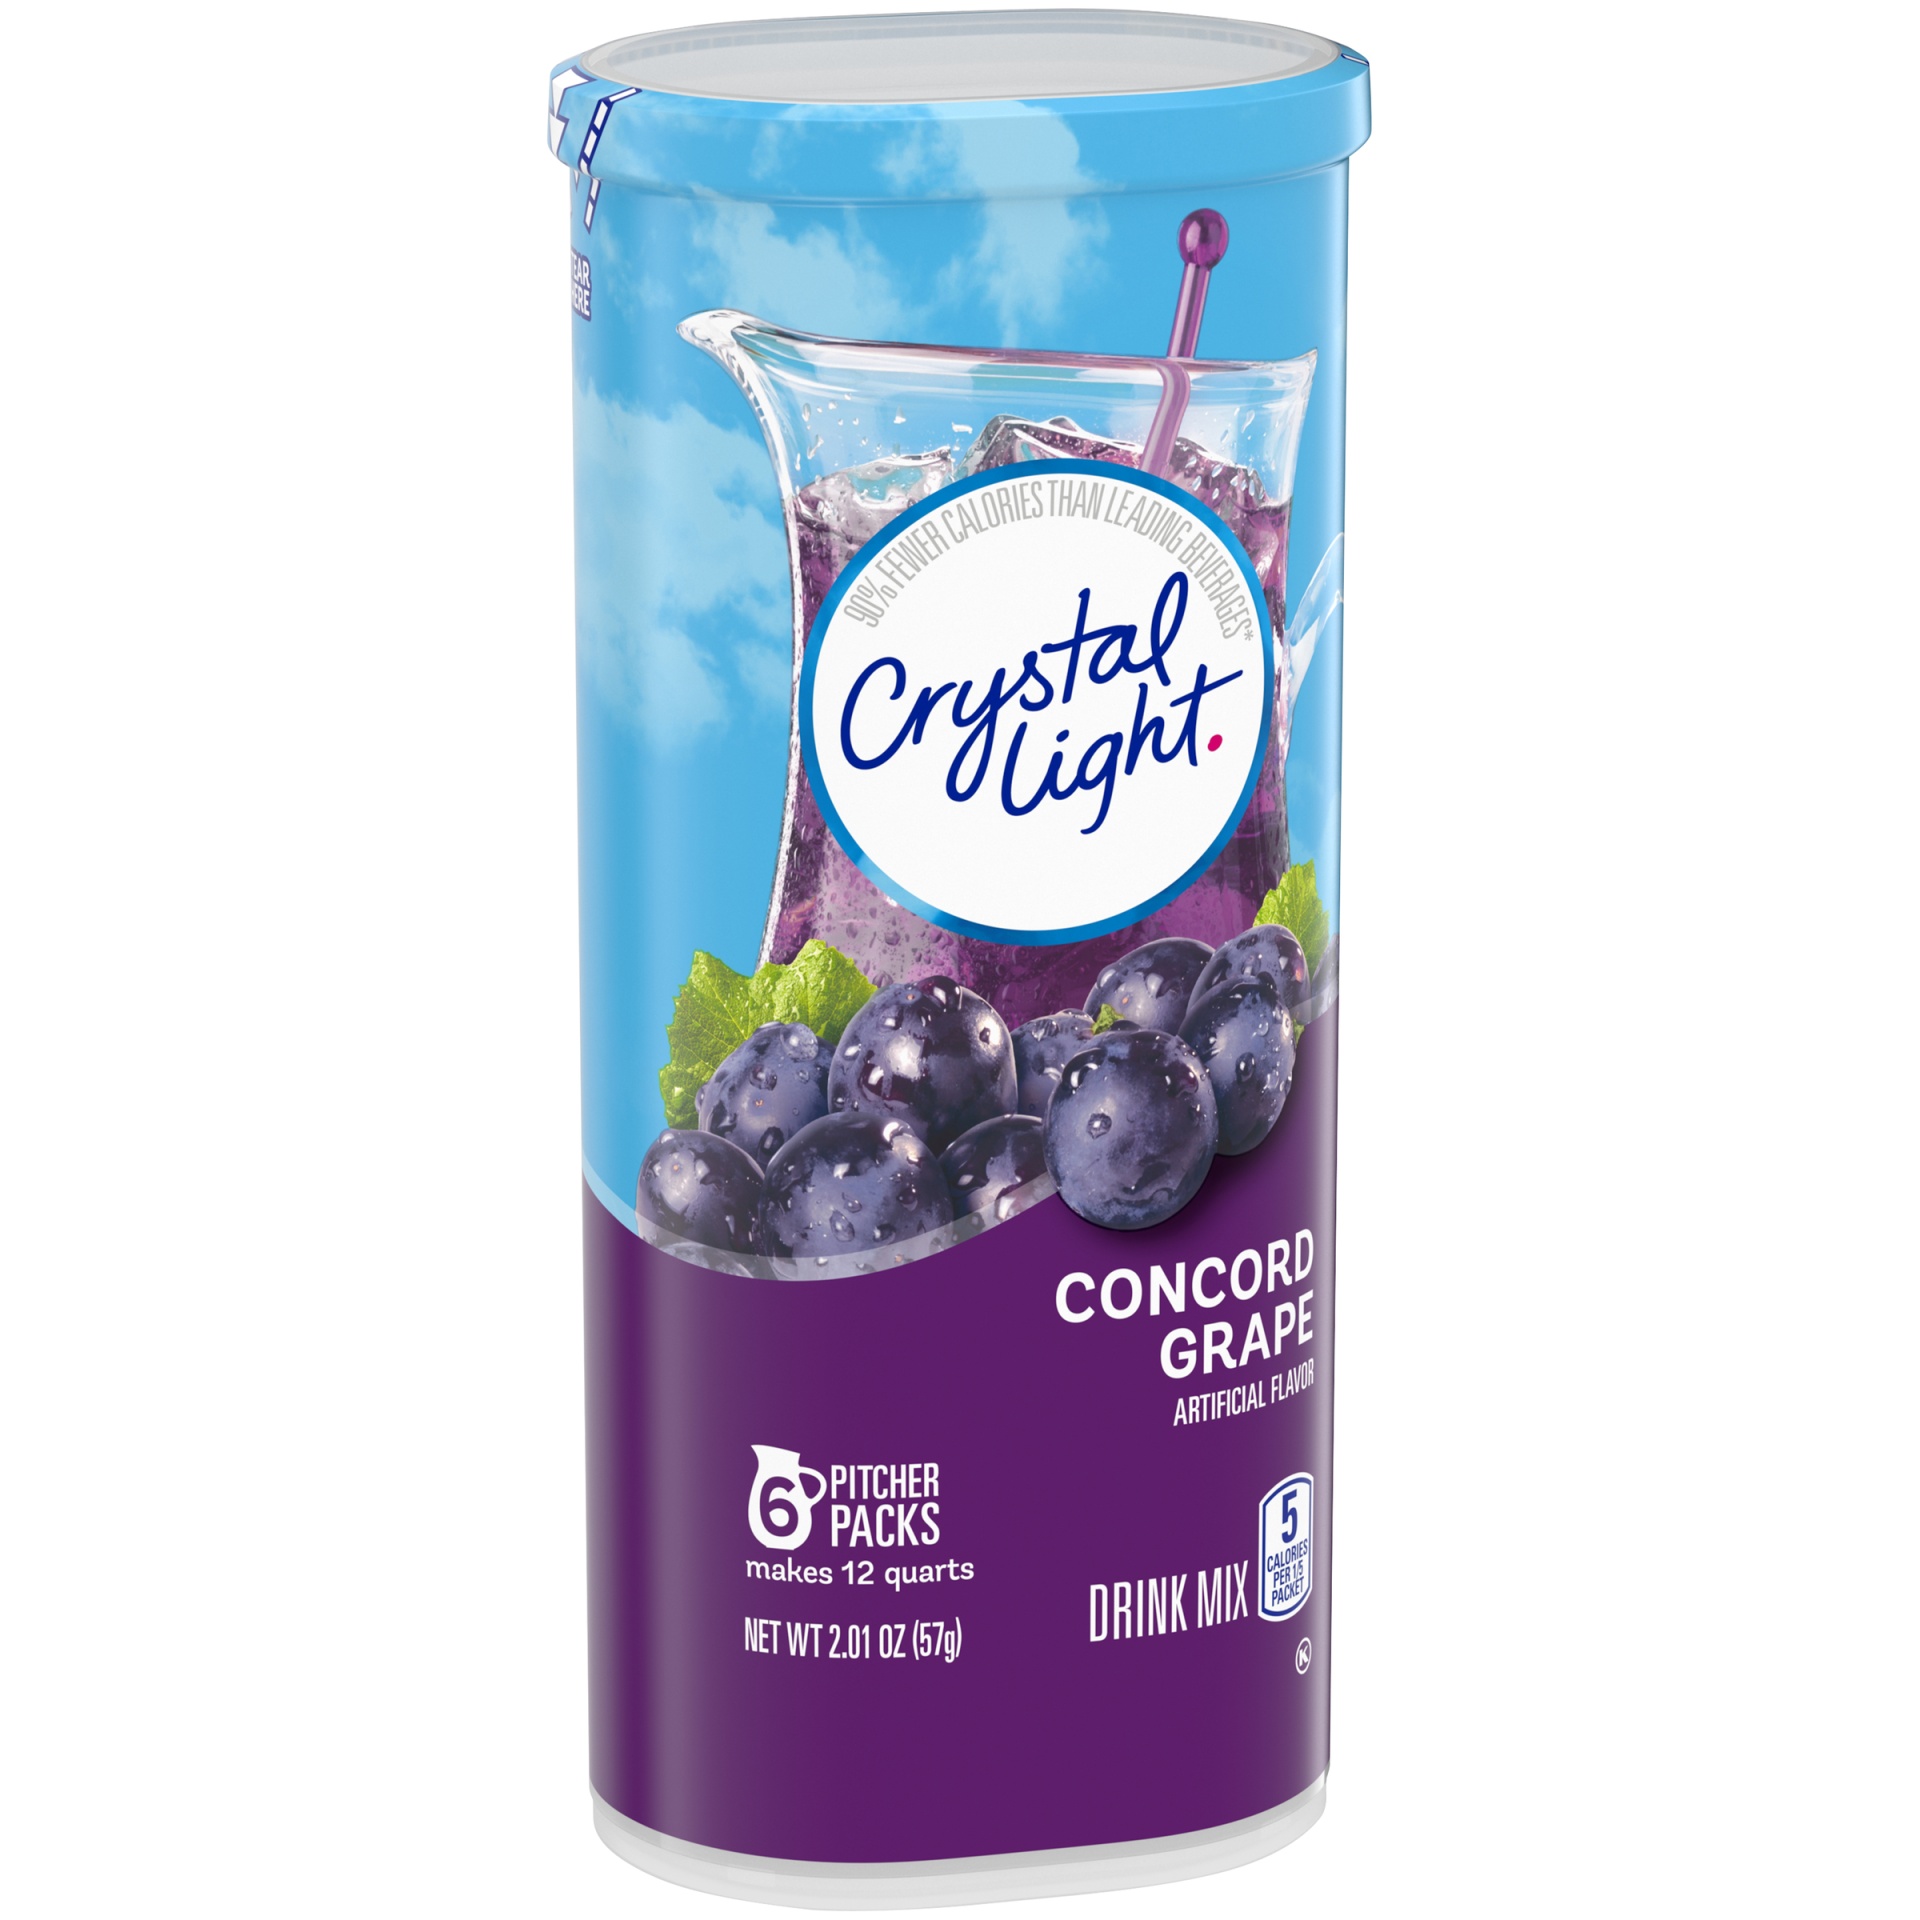 slide 7 of 11, Crystal Light Concord Grape Artificially Flavored Powdered Drink Mix Pitcher, 6 ct